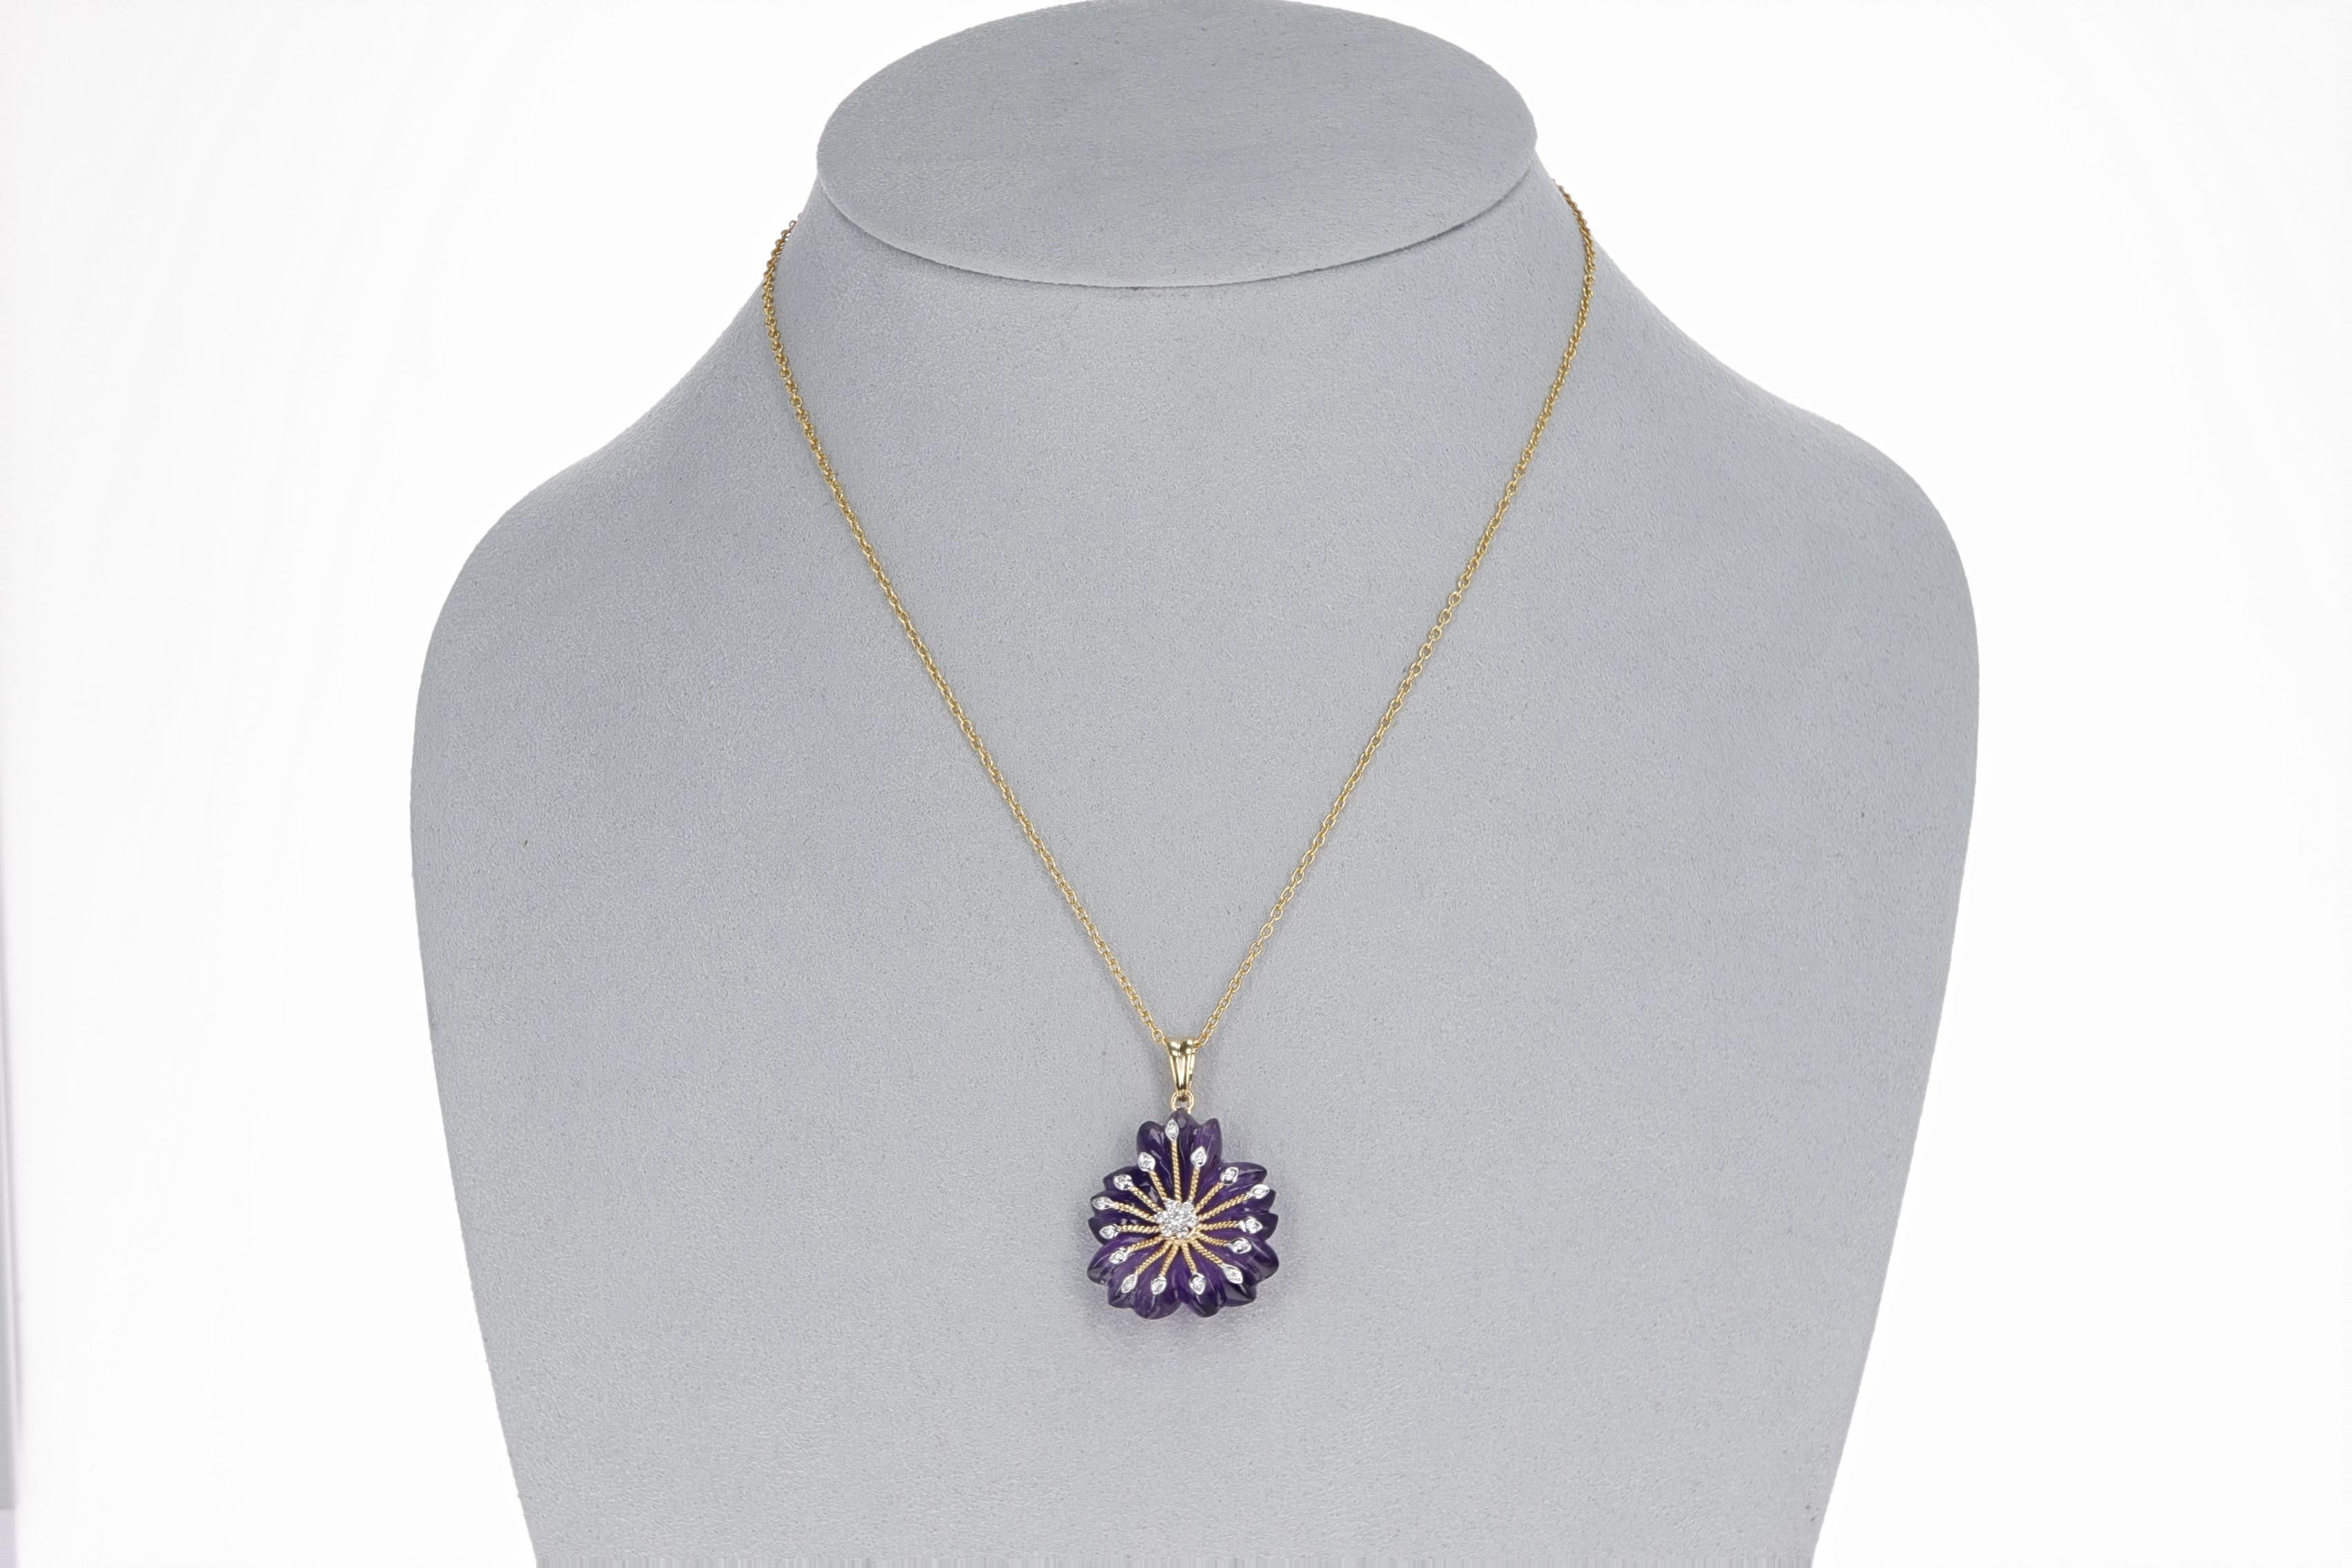 Round Cut Amethyst Carved Floral Pendant with 14k Gold and Diamonds